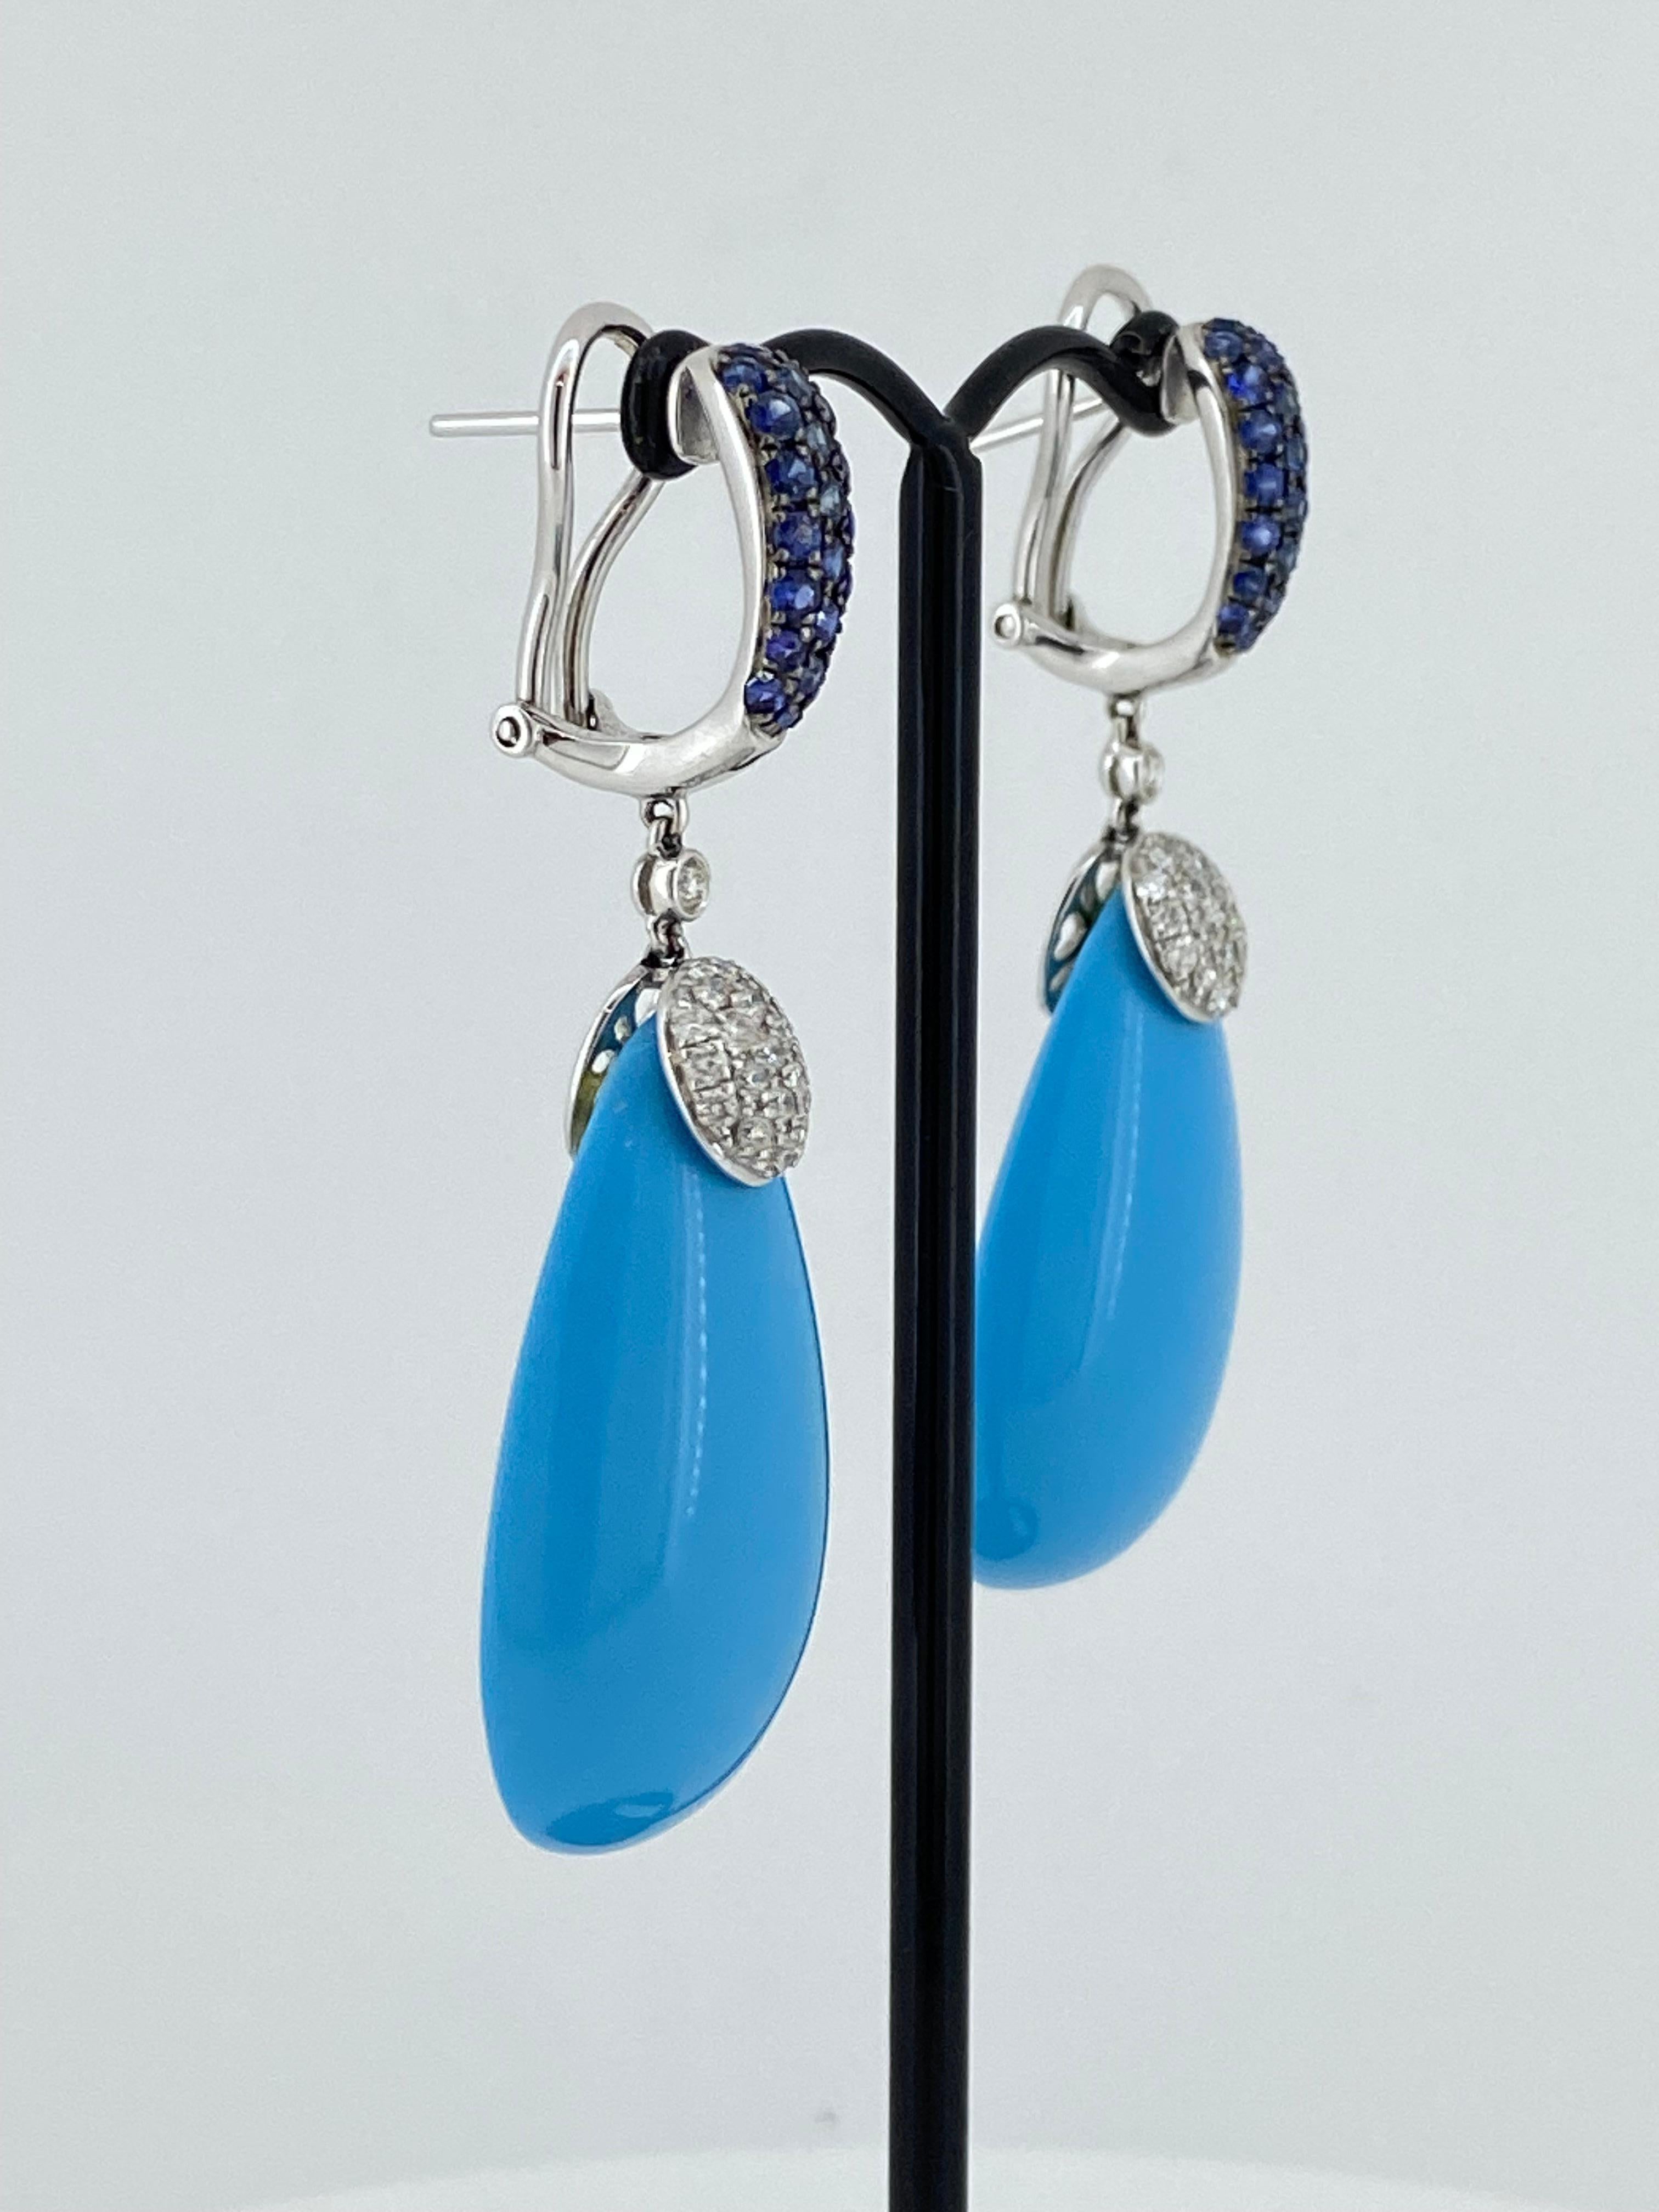 This magnificent pair of Natural Turquoise, 
Sapphire & Diamond Drop (Pendant) Earrings 
is handmade in Italy in 1970's

Meticulously crafted in 18K white gold, 
the pair features 2 pear cabochon cut Turquoise 
each of rarely seen & impressive